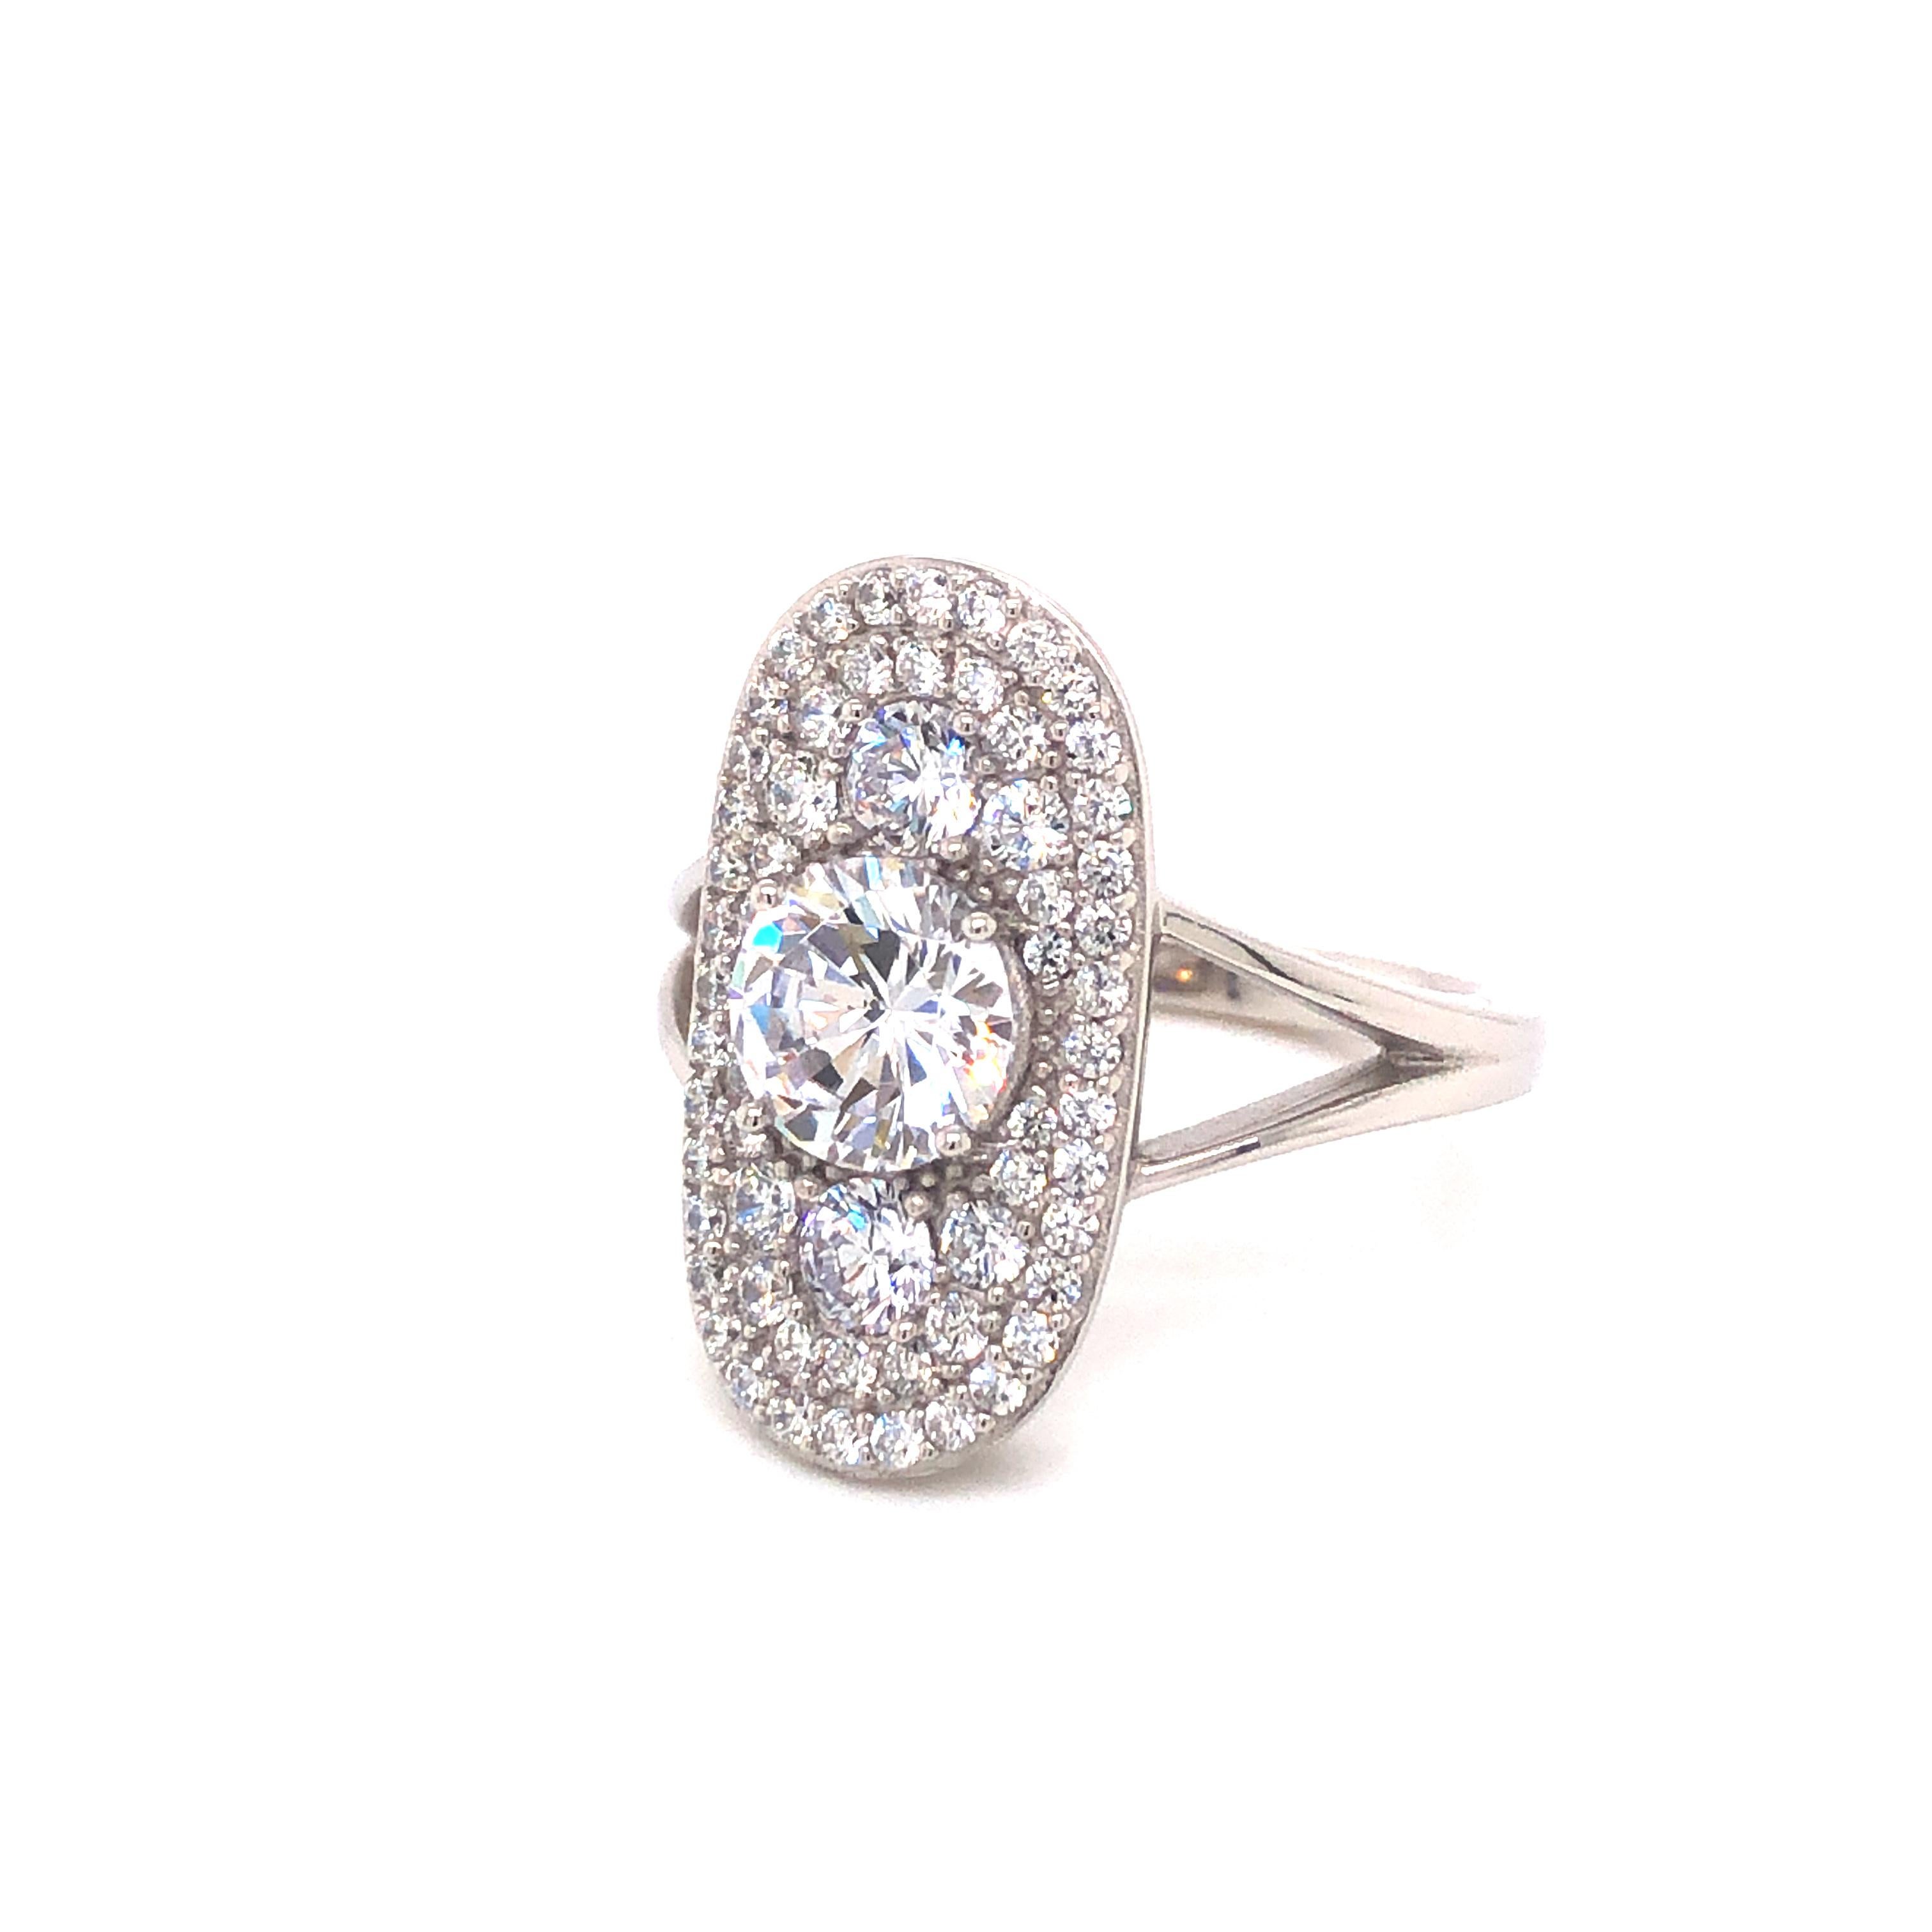 Part of our Deco Collection, and inspired by the roaring twenties, this show stopping design has the timeless appeal of this iconic decade. 

Unusual oval design housing one large round brilliant cut cubic zirconia surrounded by a shimmering array